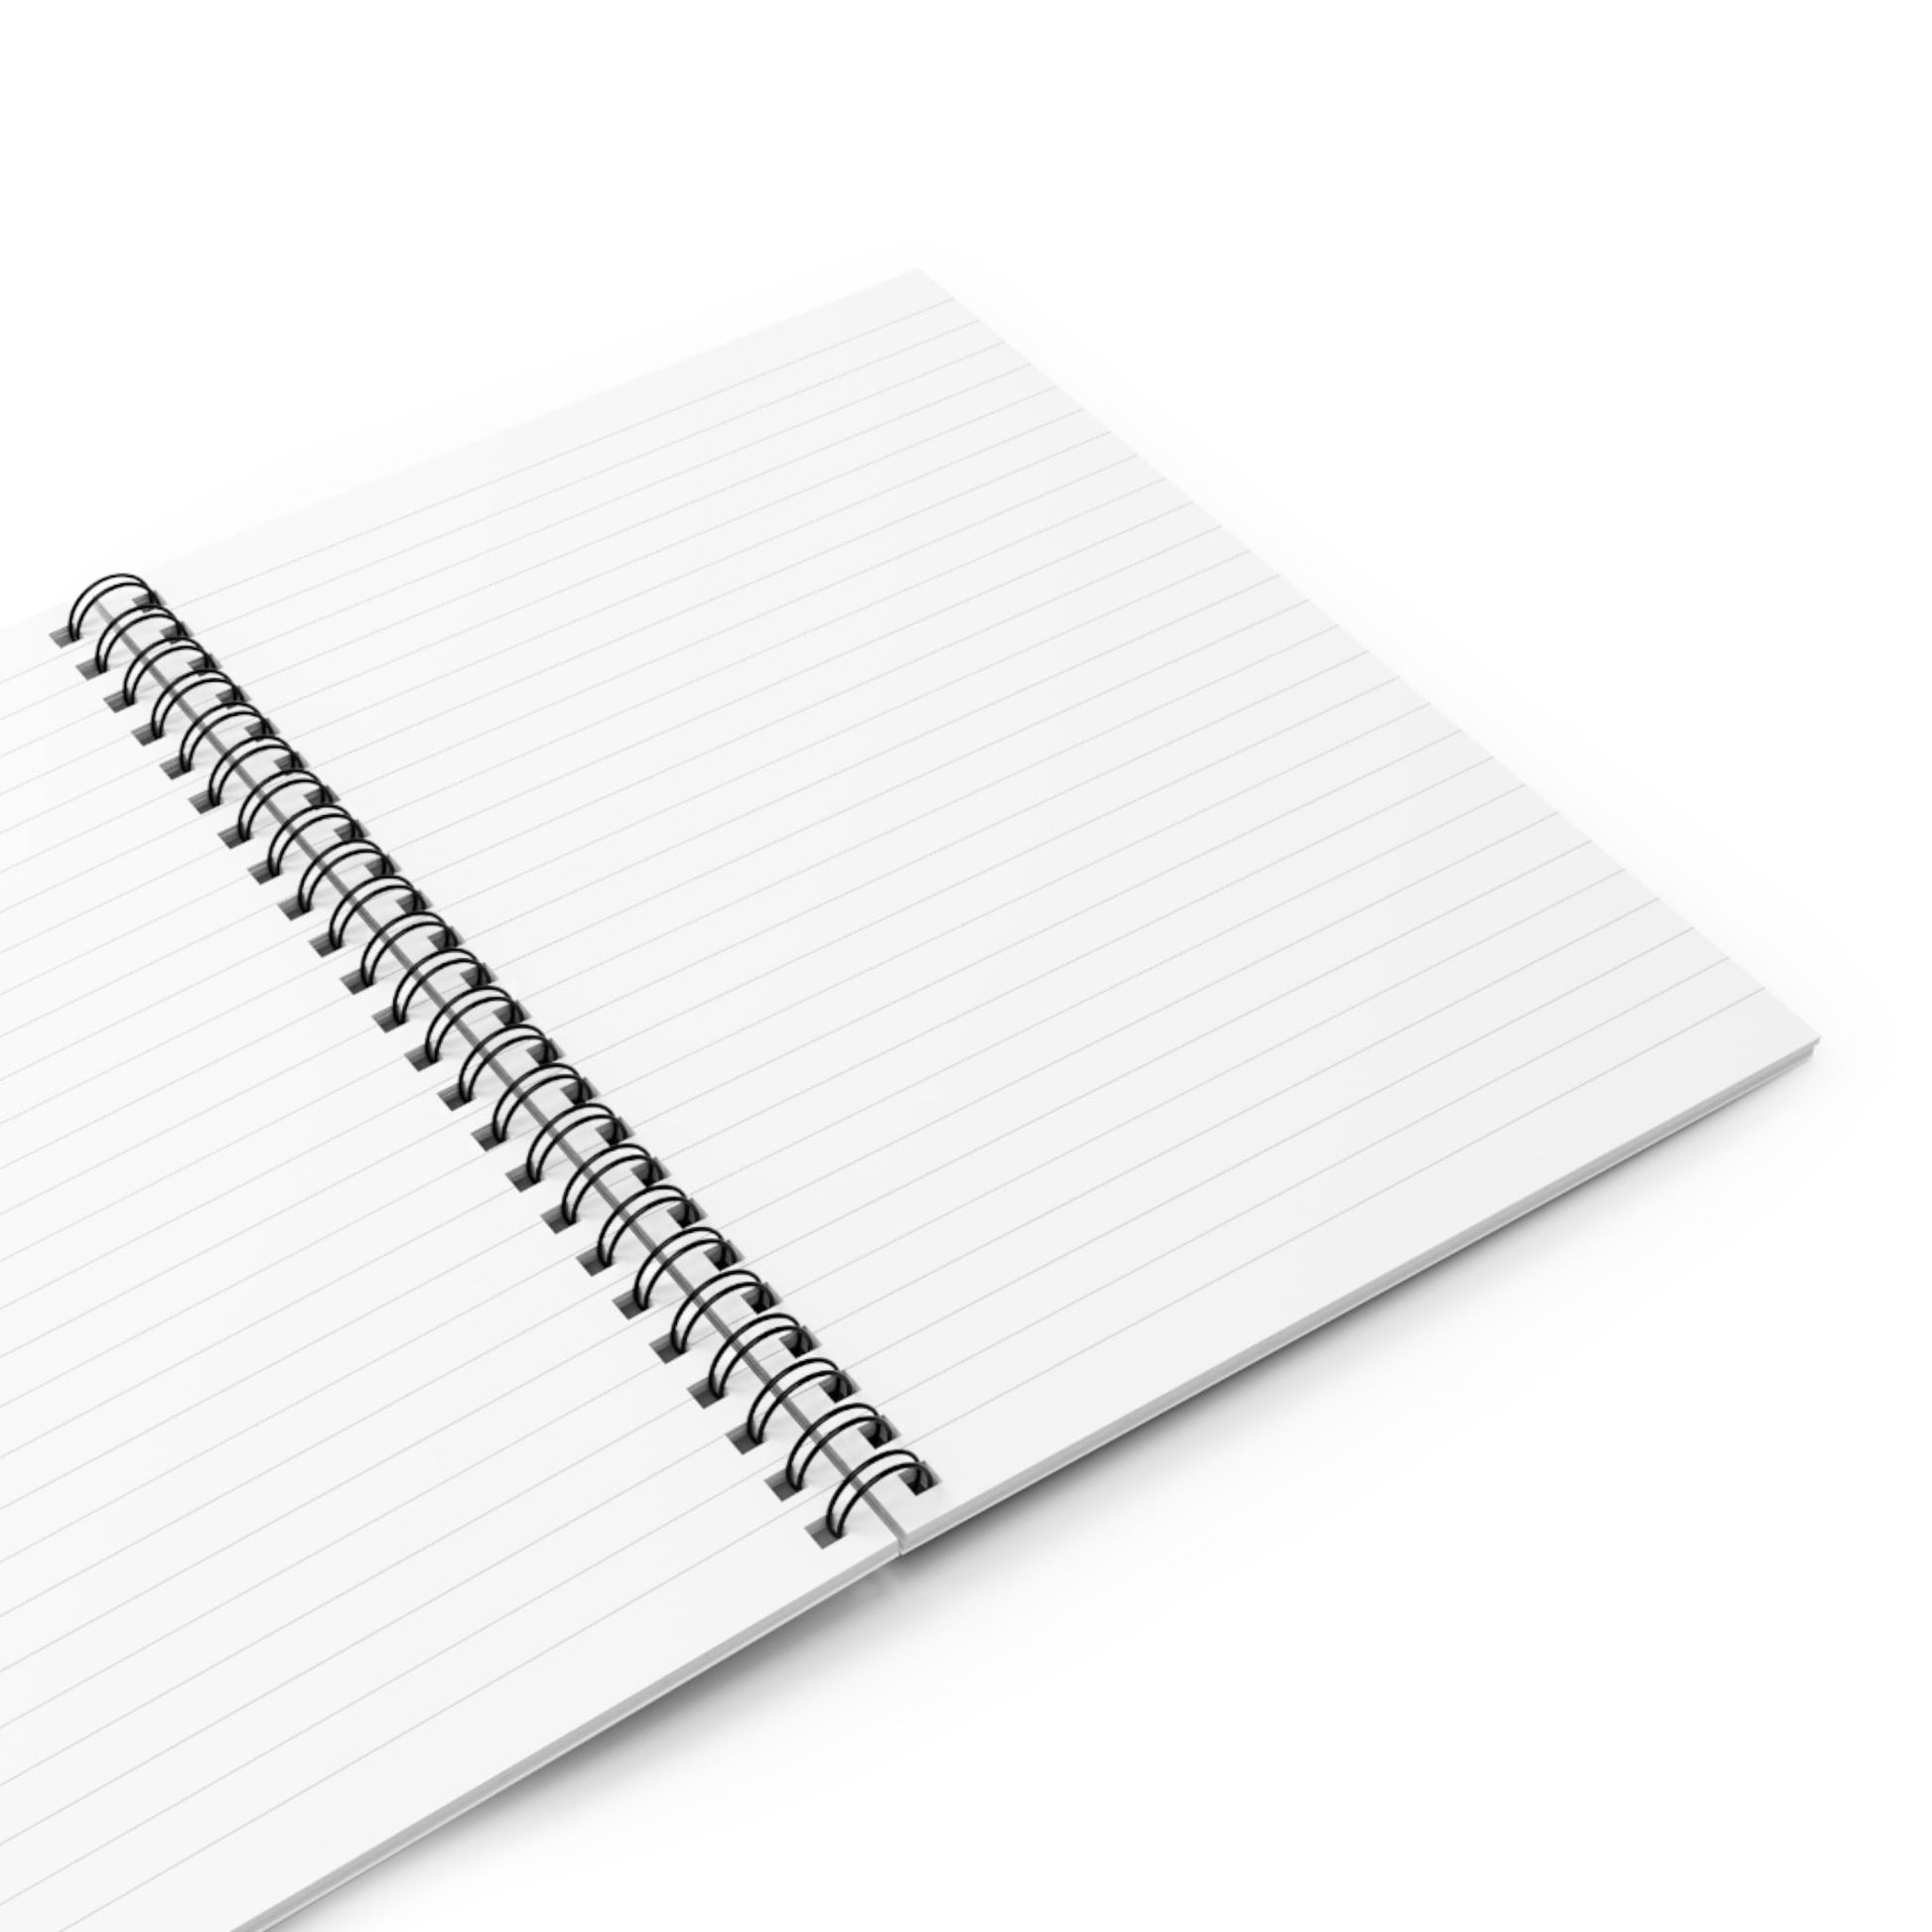 Spiral Notebook with Weird and Fun Cover Opened with Blank White College Ruled Pages